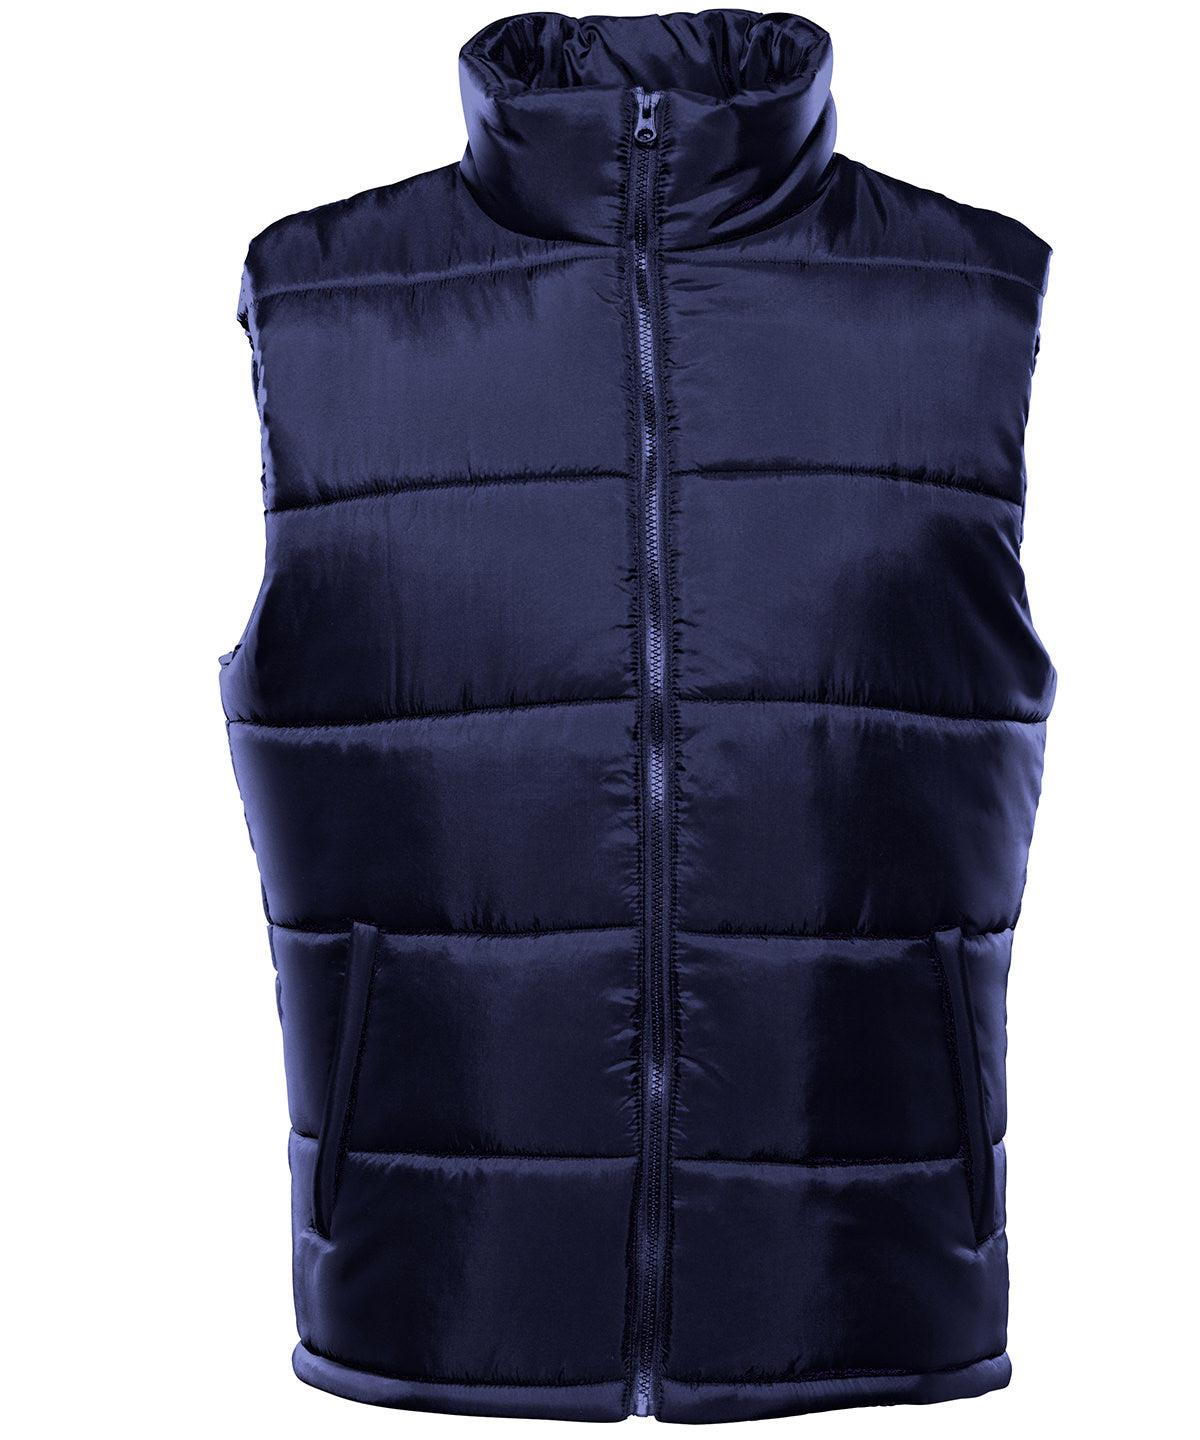 Navy - Bodywarmer Body Warmers 2786 Camo, Gilets and Bodywarmers, Jackets & Coats, Must Haves, Outdoor Dining, Padded & Insulation, Plus Sizes, Rebrandable, Streetwear Schoolwear Centres